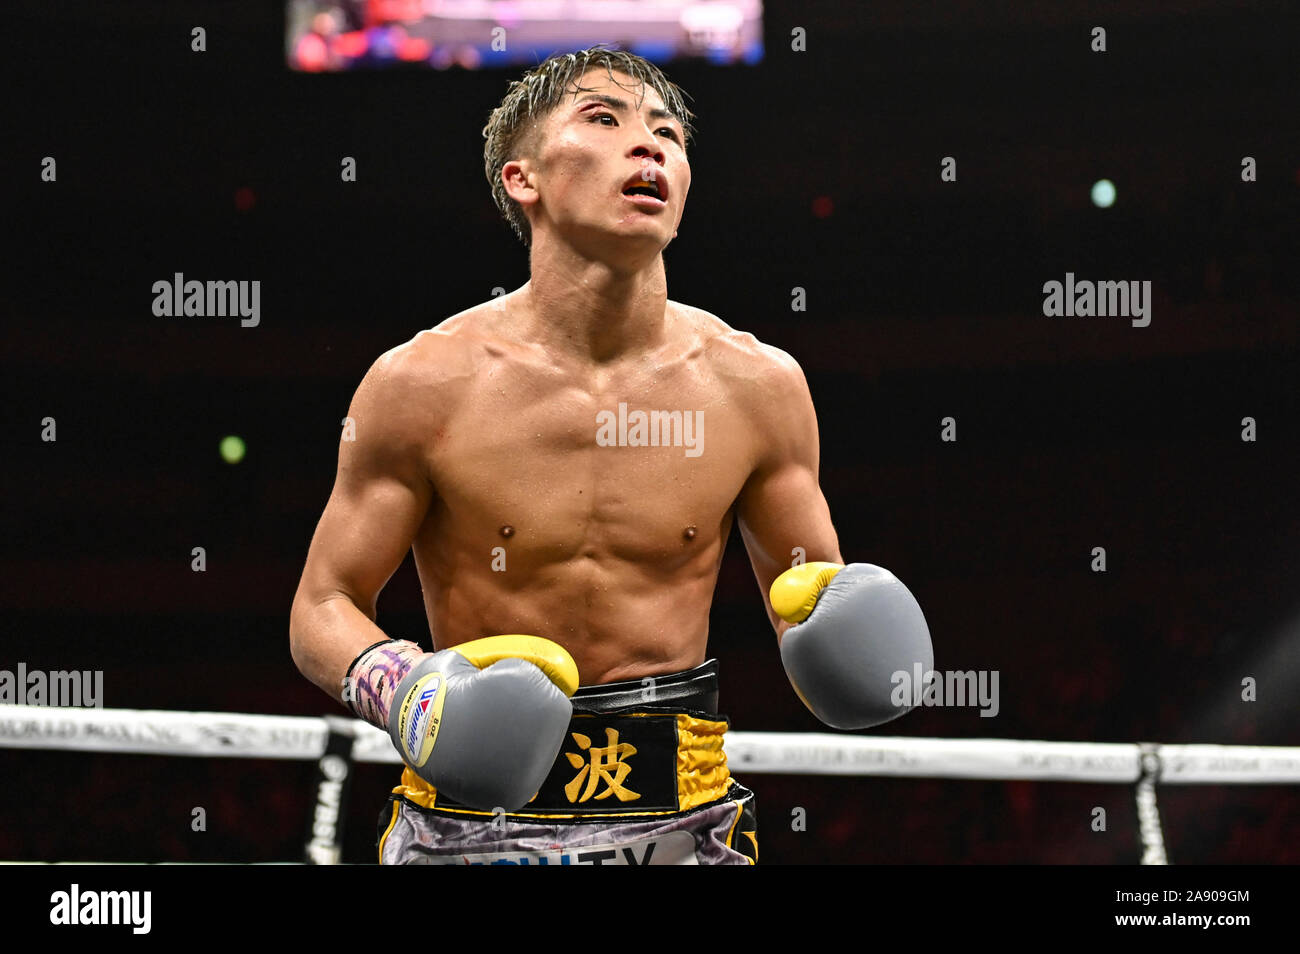 Naoya Inoue of Japan reacts after knocking down Nonito Donaire of Philippines in the 11th round of their World Boxing Super Series bantamweight final match against Nonito Donaire of Philippines at Saitama